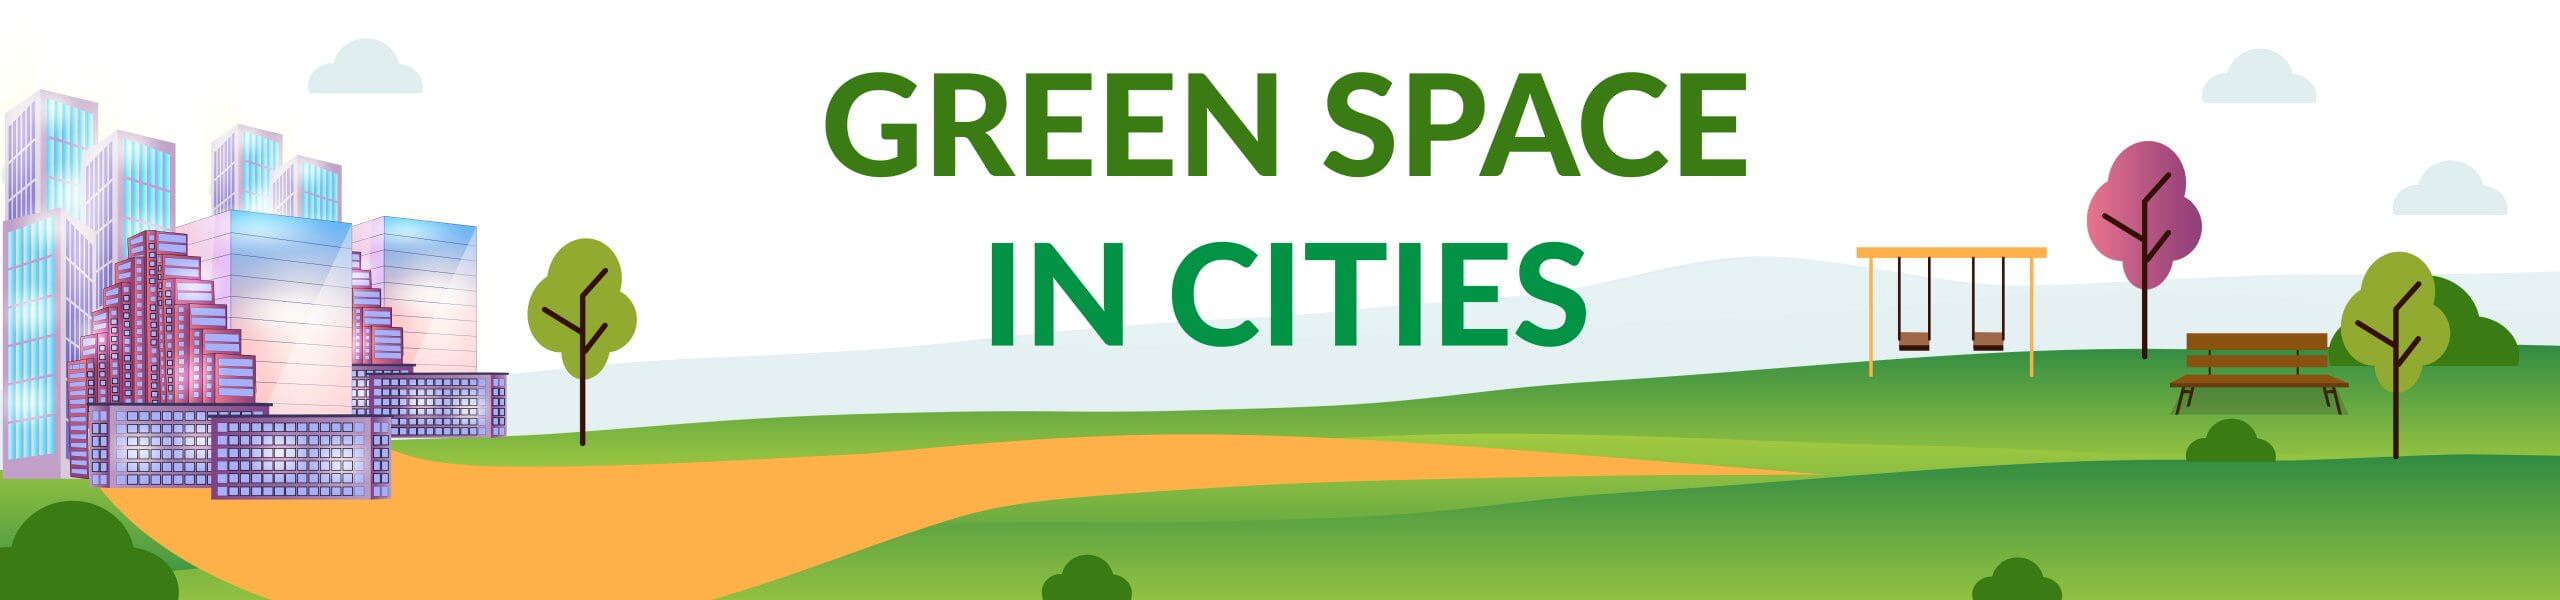 Green space Header image